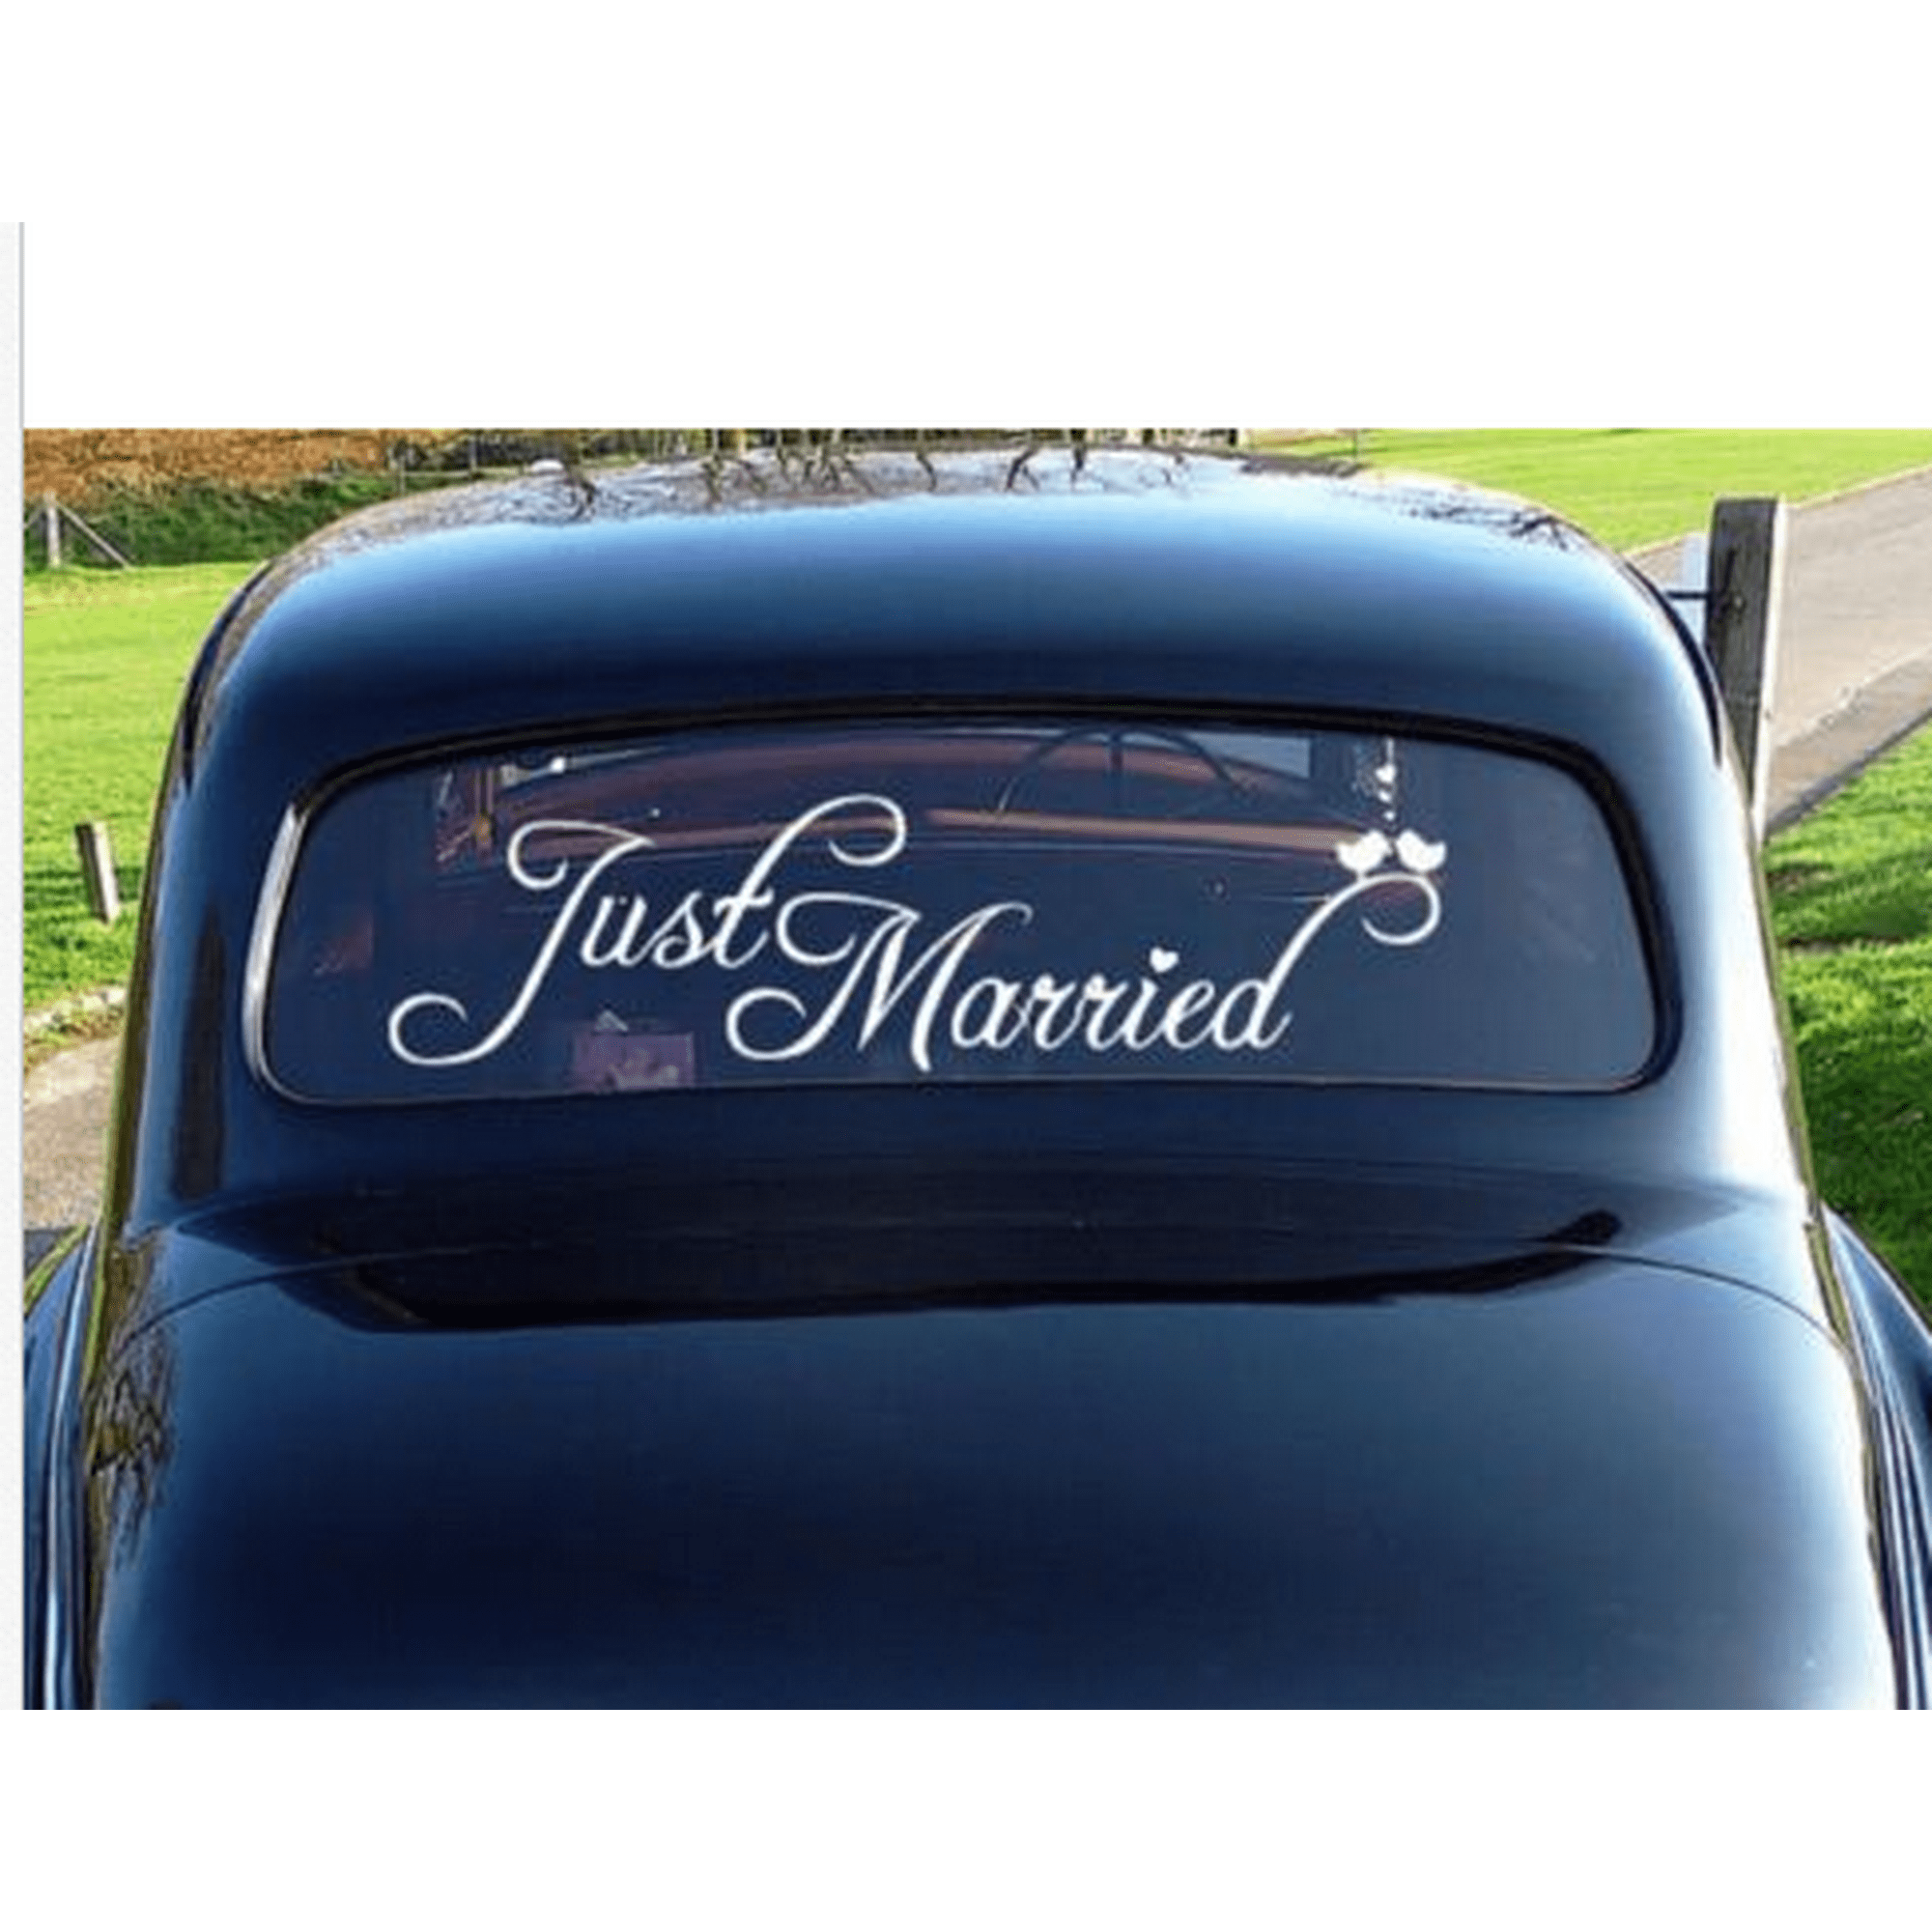 Custom Door Decals Vinyl Stickers Multiple Sizes Congratulations Bride and Groom Brown Lifestyle Wedding Outdoor Luggage & Bumper Stickers for Cars Brown 54X36Inches Set of 2 